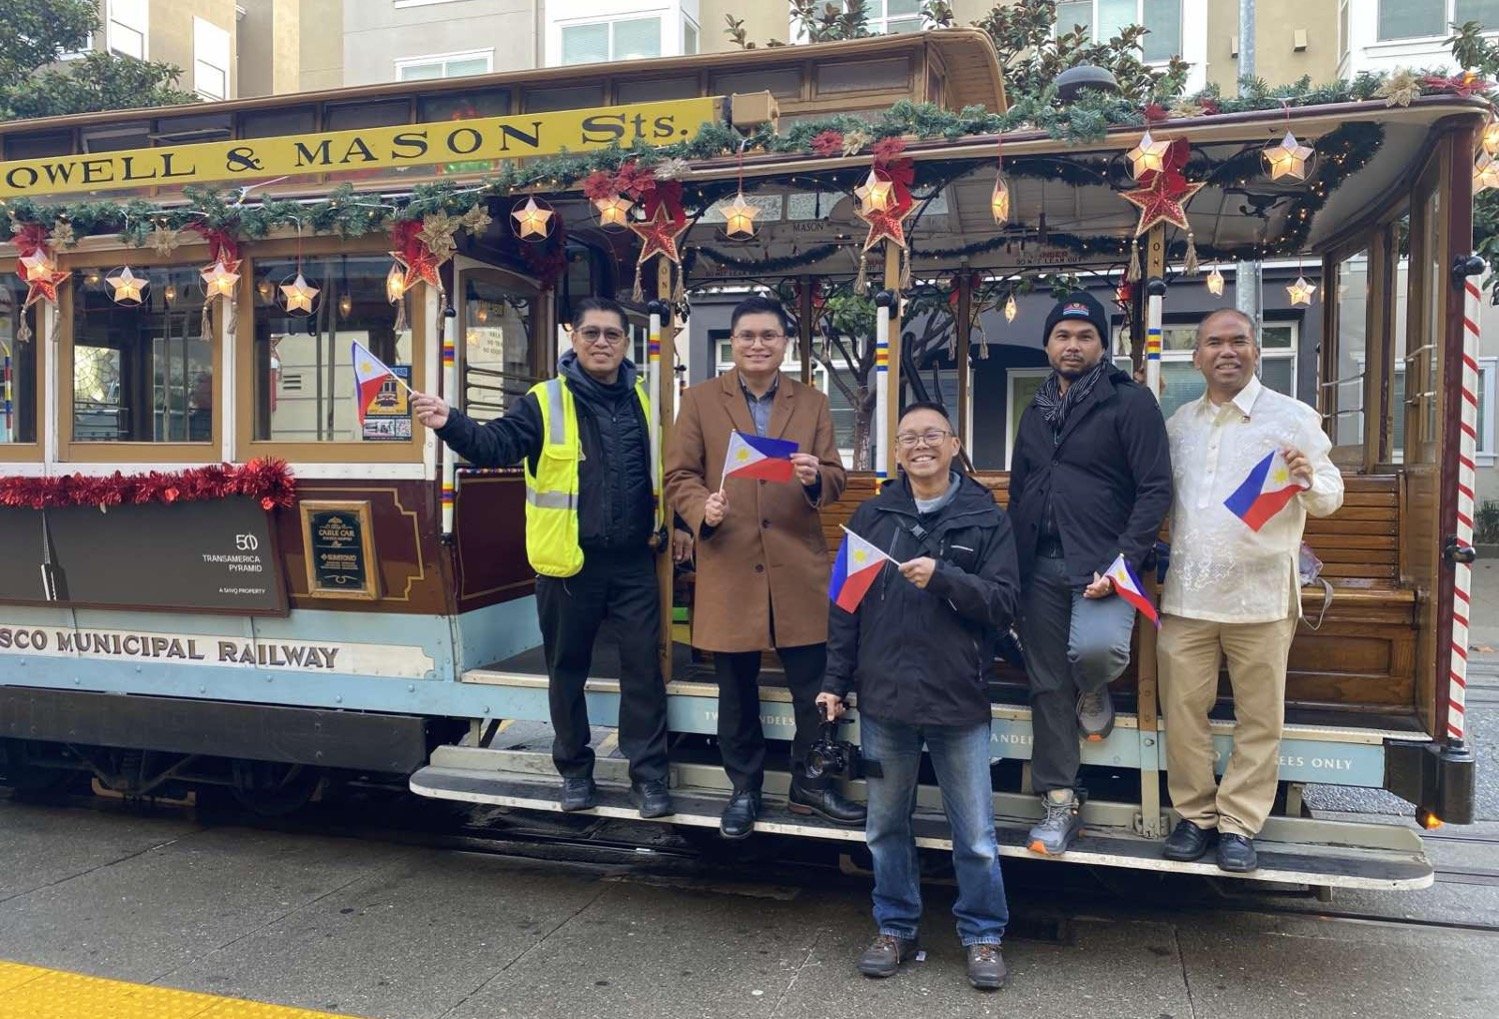 San Francisco's Iconic Cable Car is Dressed Up For Christmas,  Filipino-Style - Philippine Consulate General in San Francisco